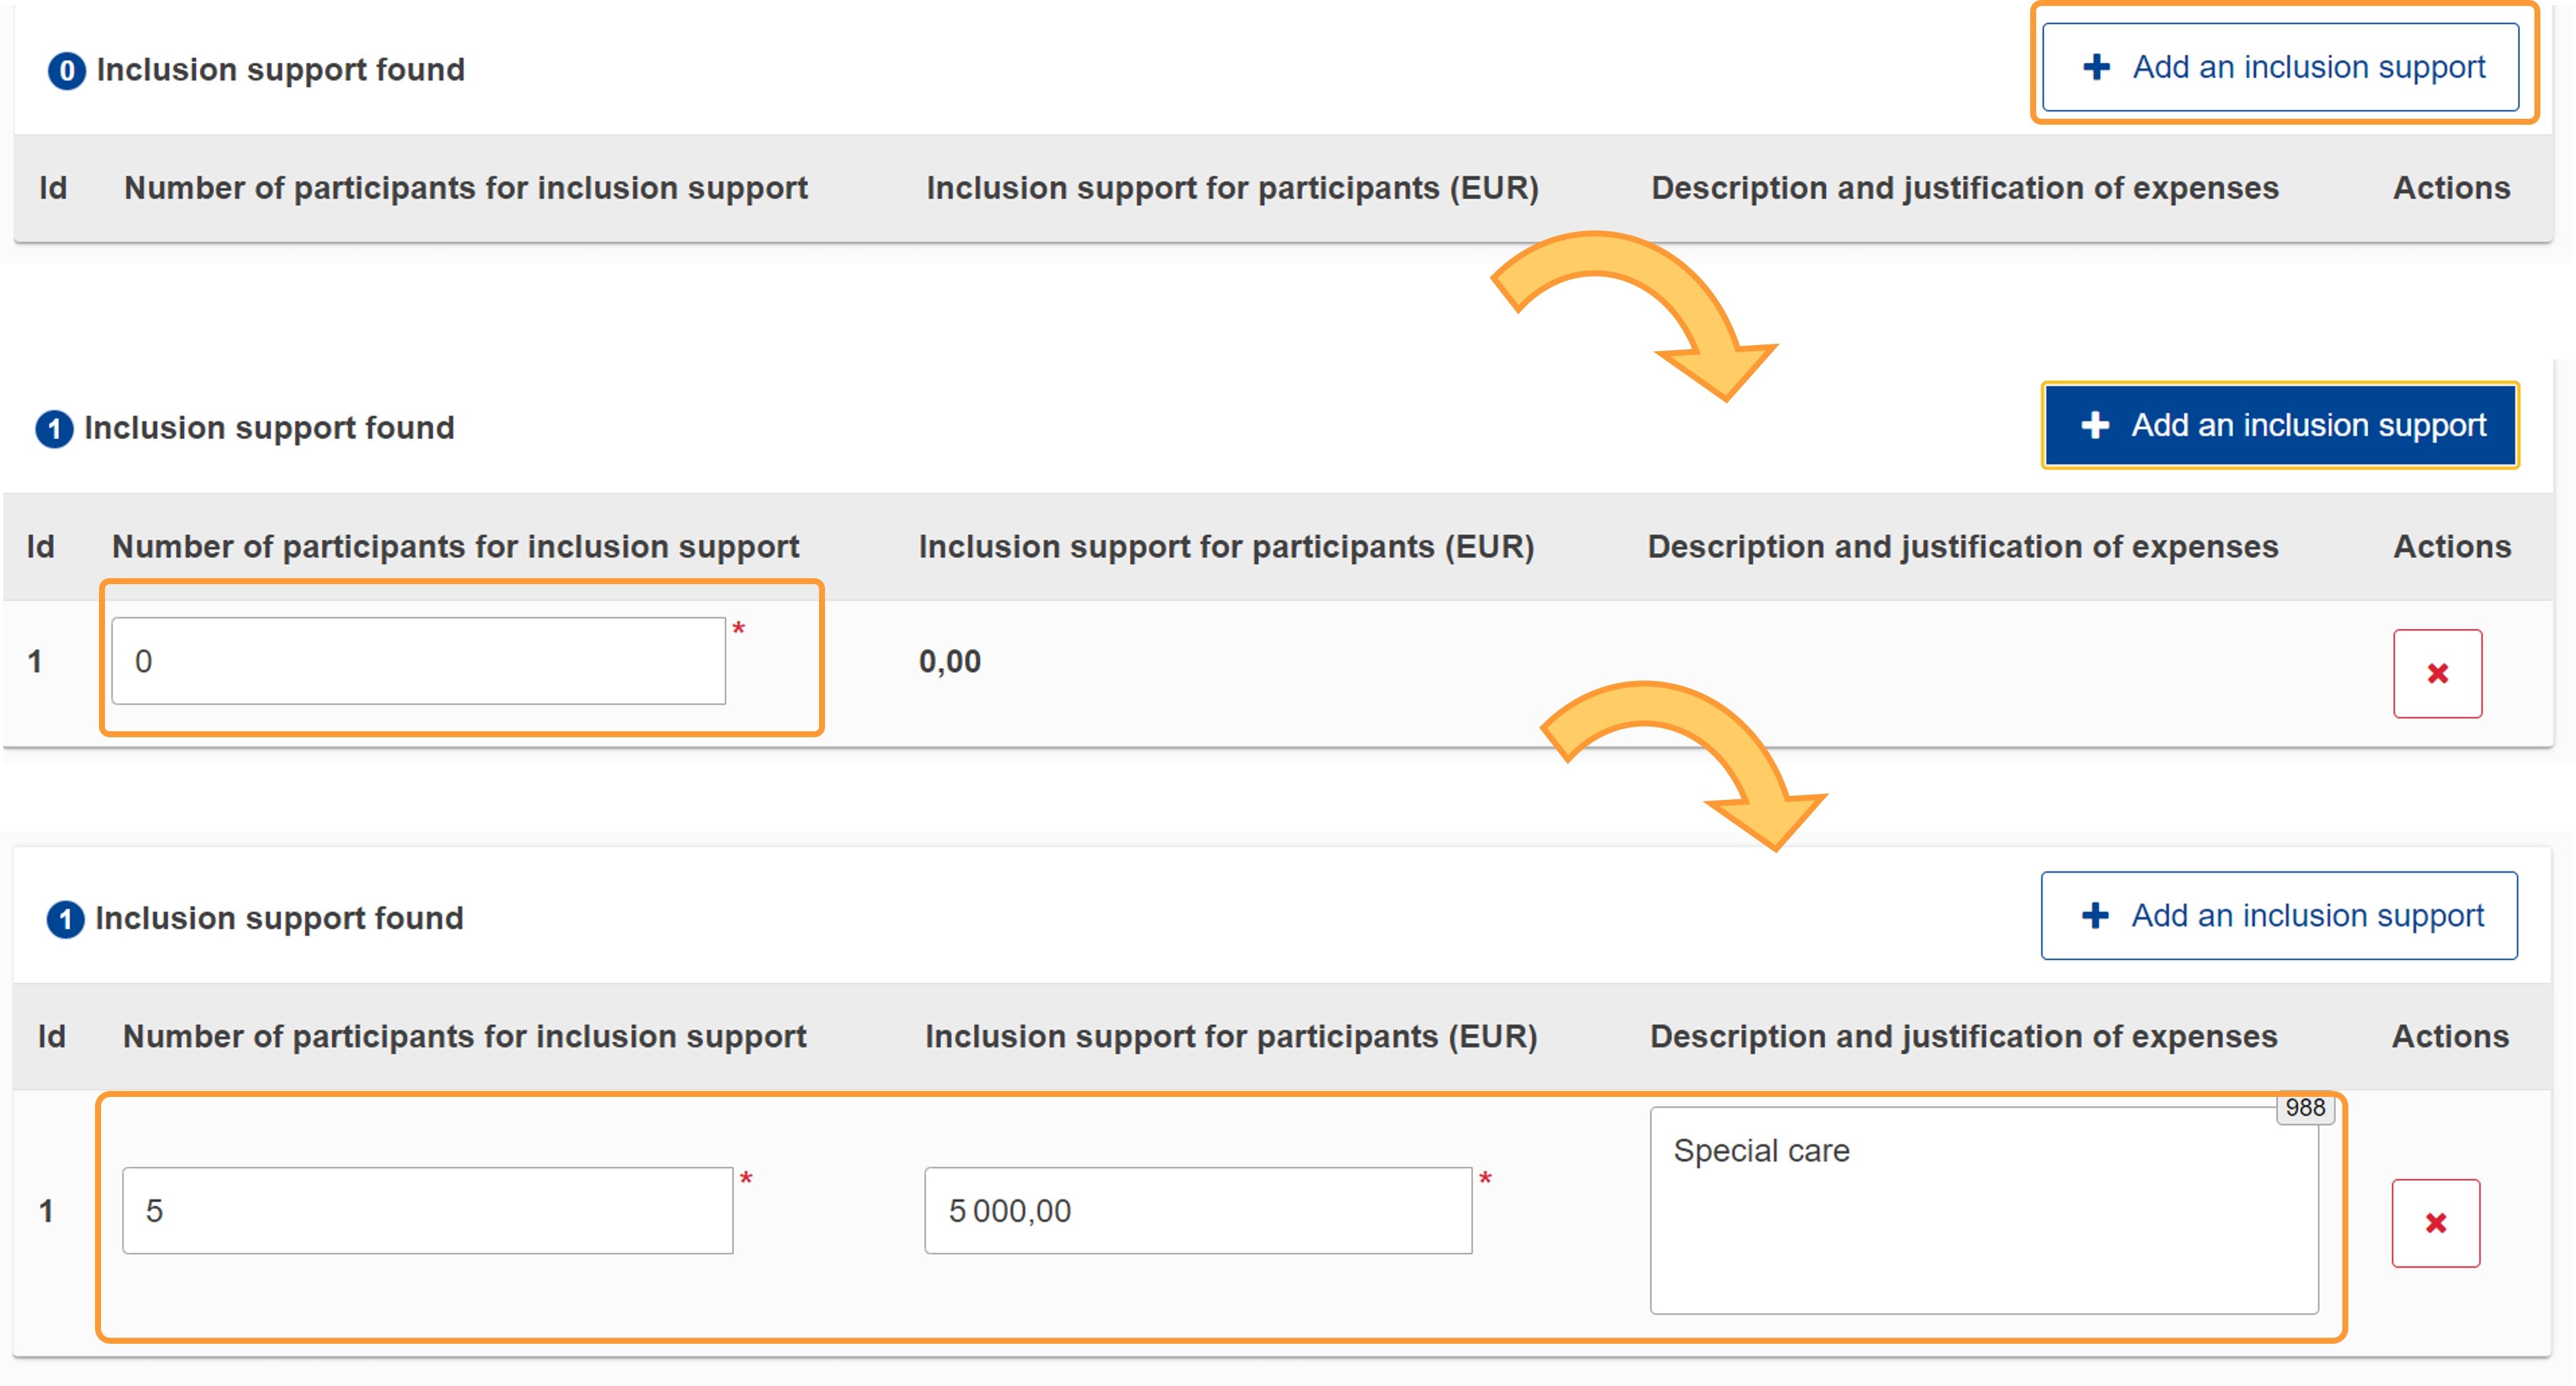 Add Inclusion support for participants using the Add an inclusion support button 